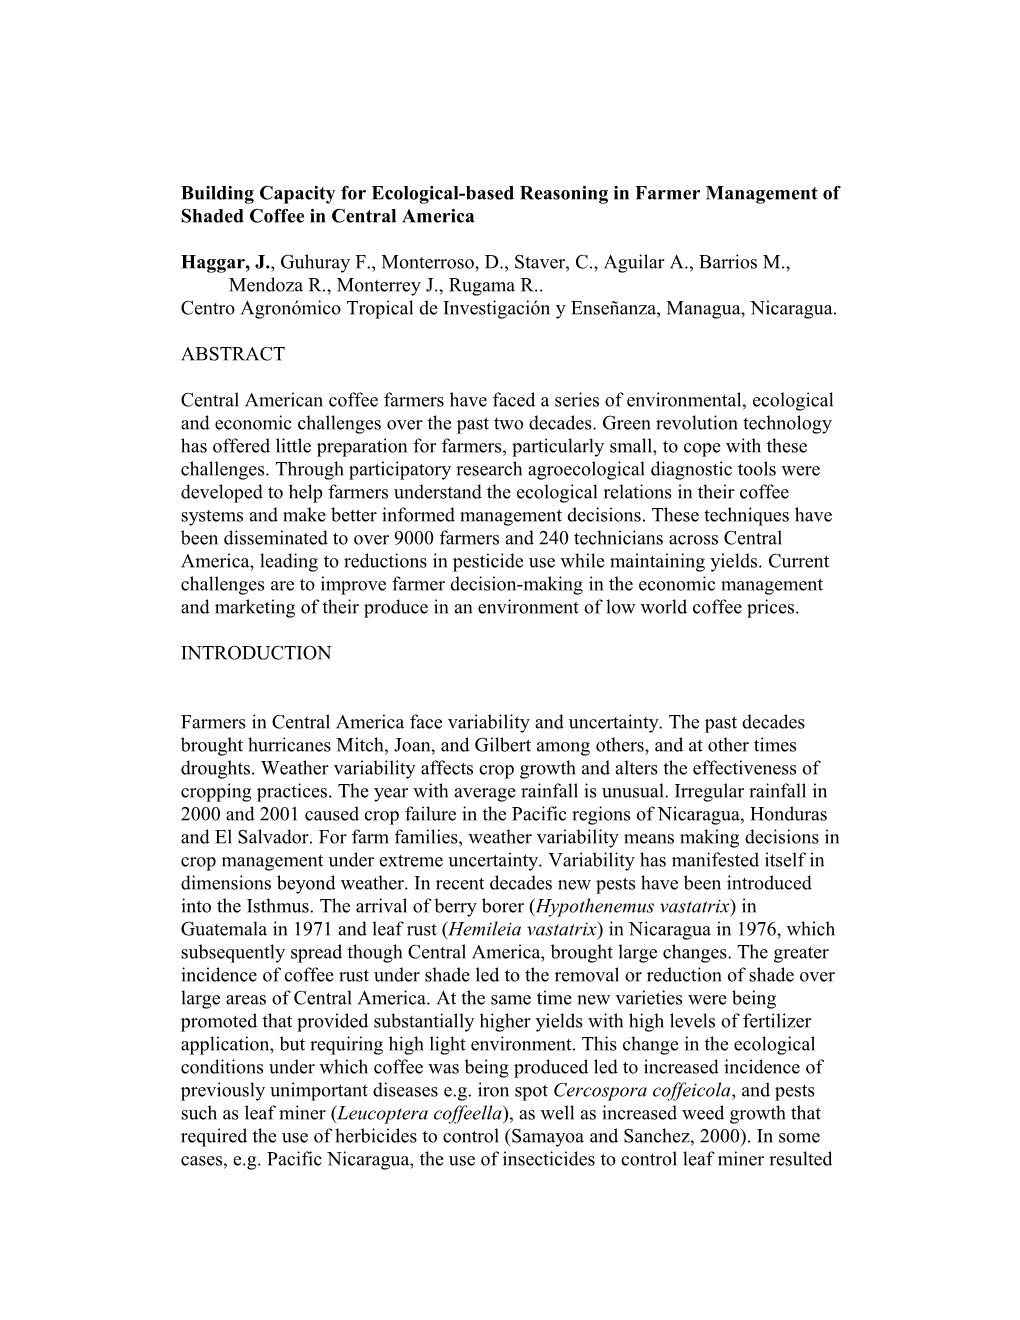 Creating Capacity for Ecological-Based Reasoning in the Management of Coffee in Central America